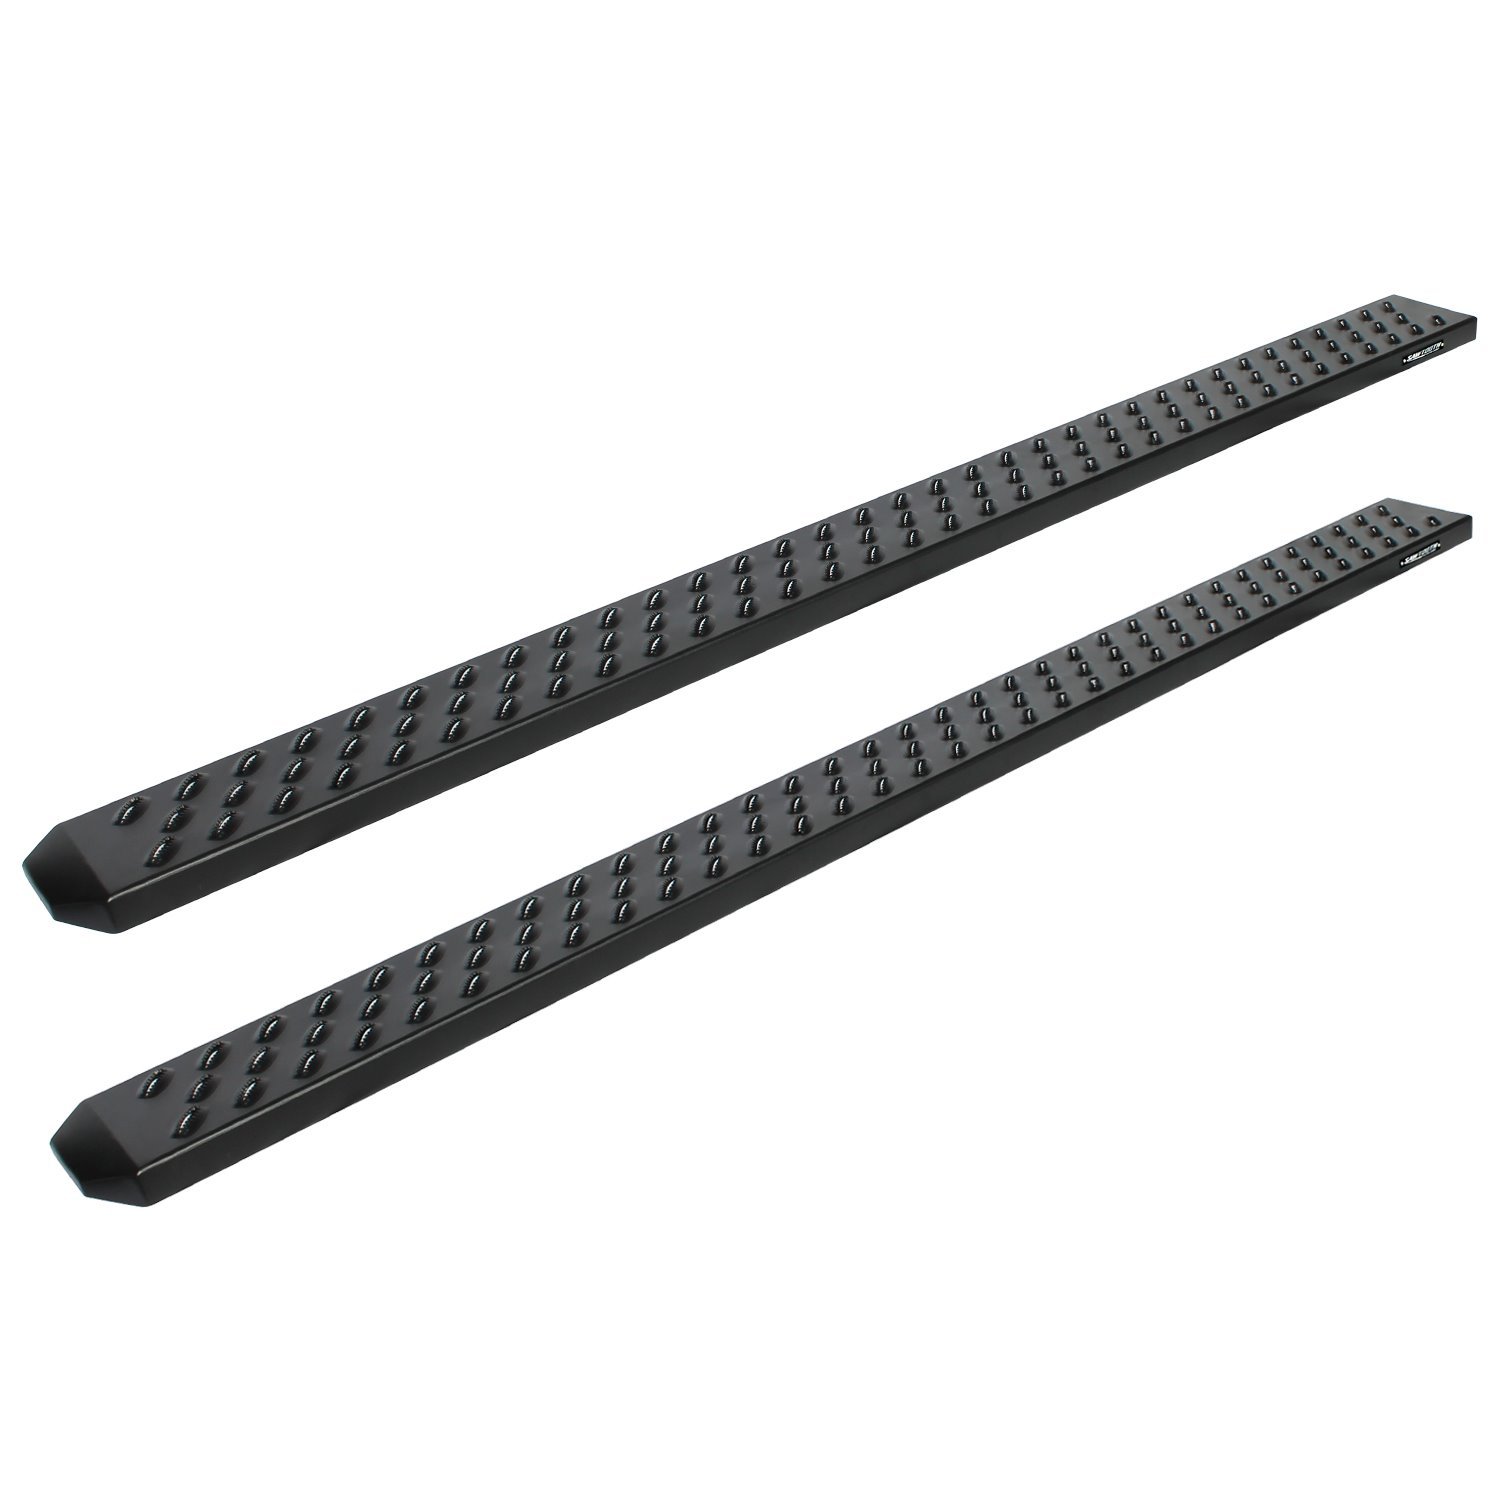 2103-0343BT 6.5 in Sawtooth Slide Track Running Boards, Black Aluminum, 99-16 Ford F-250/F-350 Super Duty Extended Cab